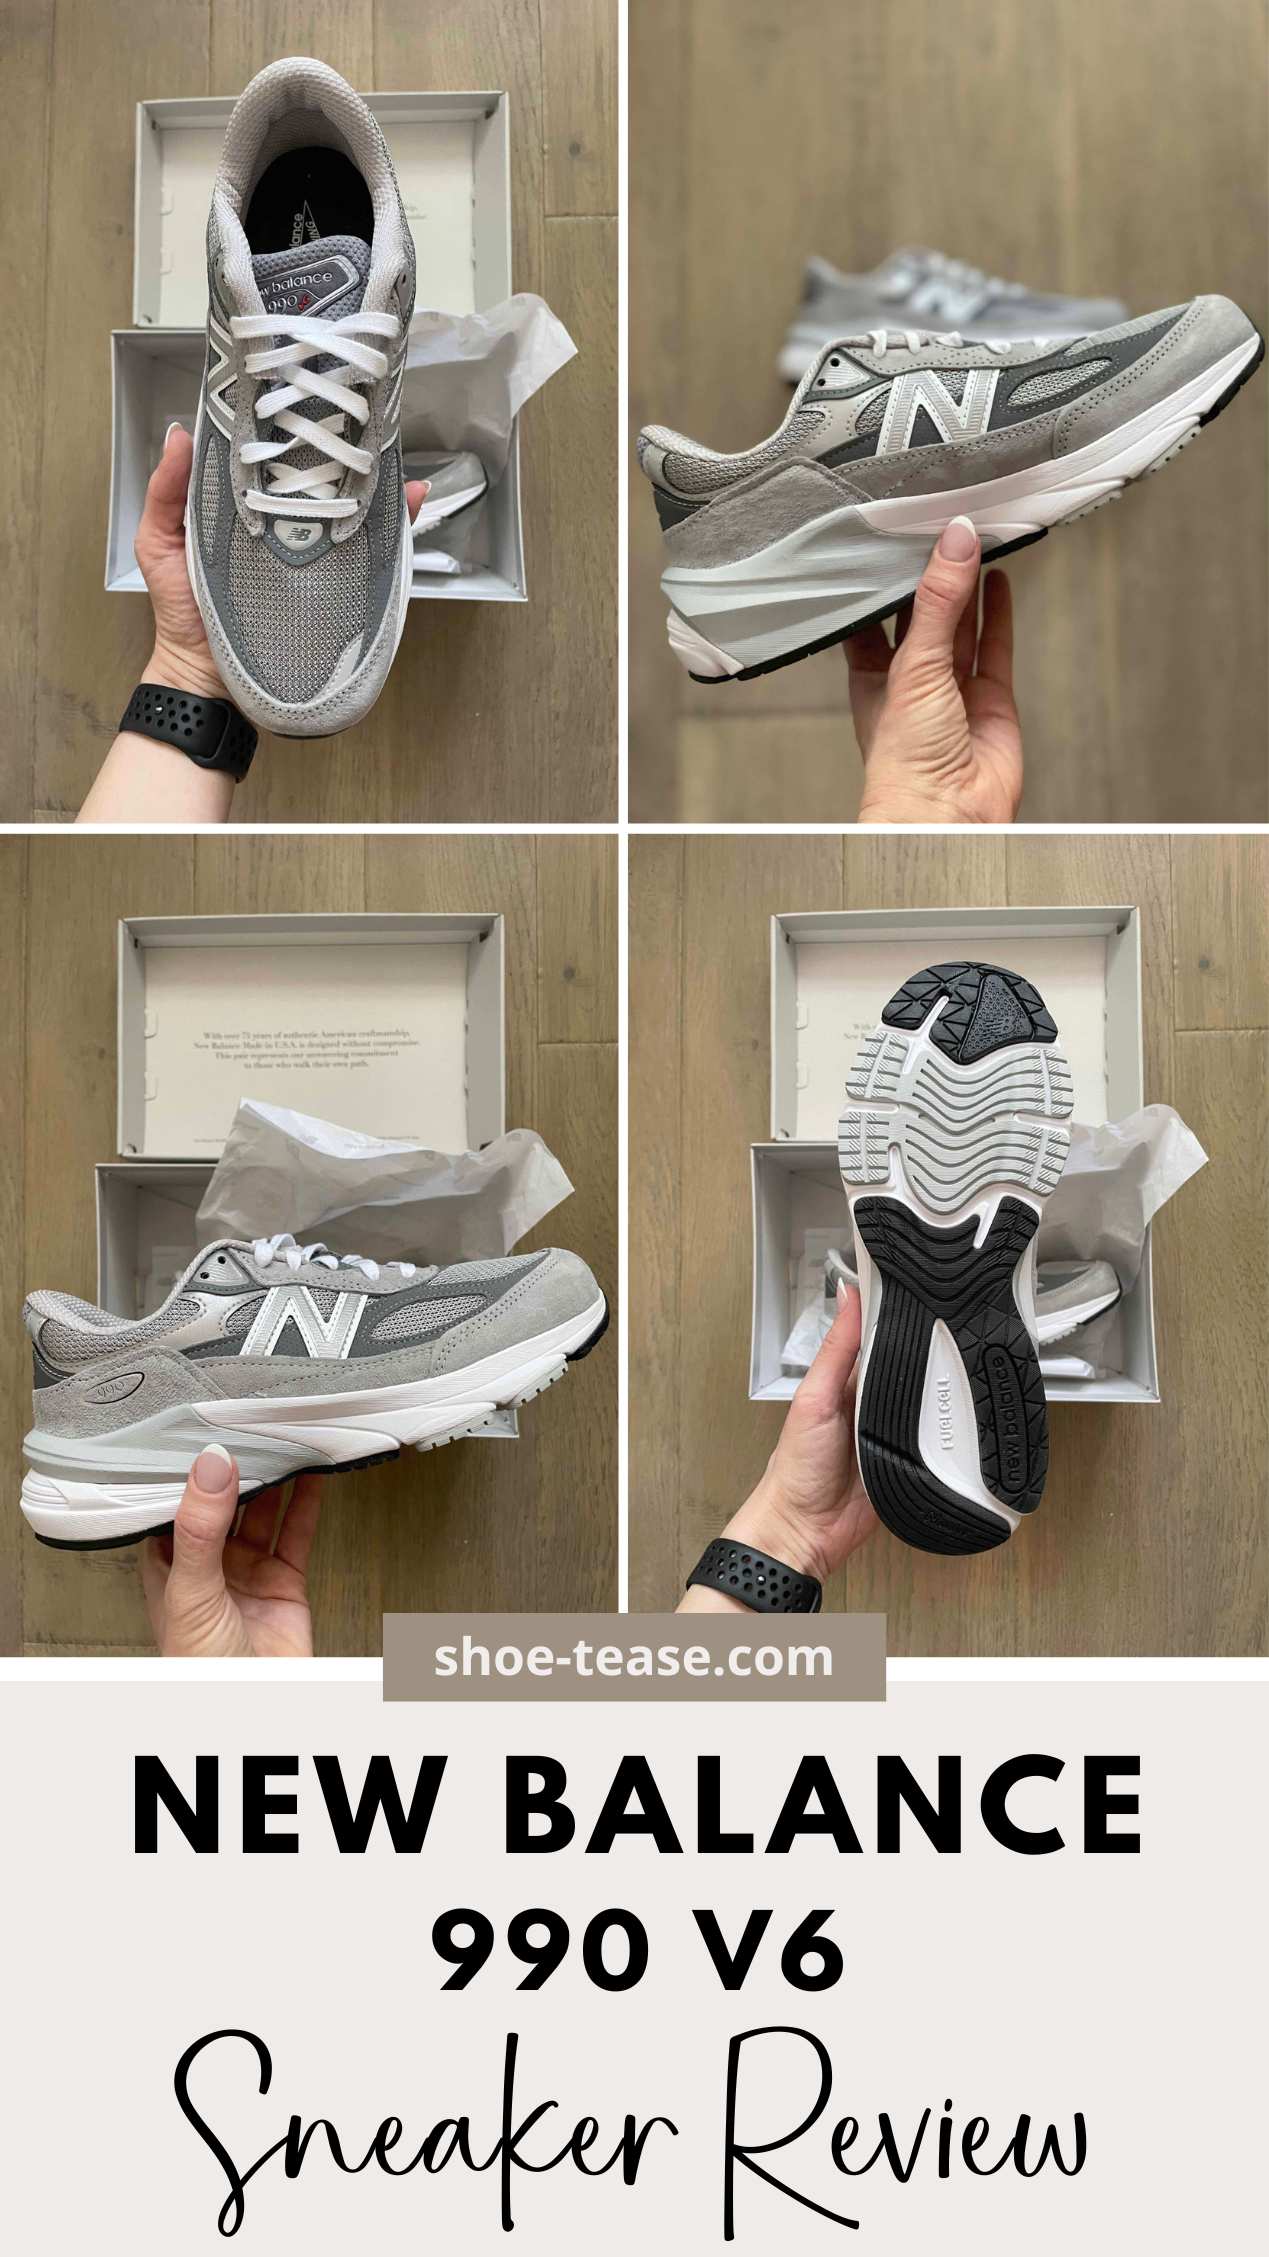 Collage of woman holding New Balance 990 V6 dad-style sneakers at 3 different angles out of box.